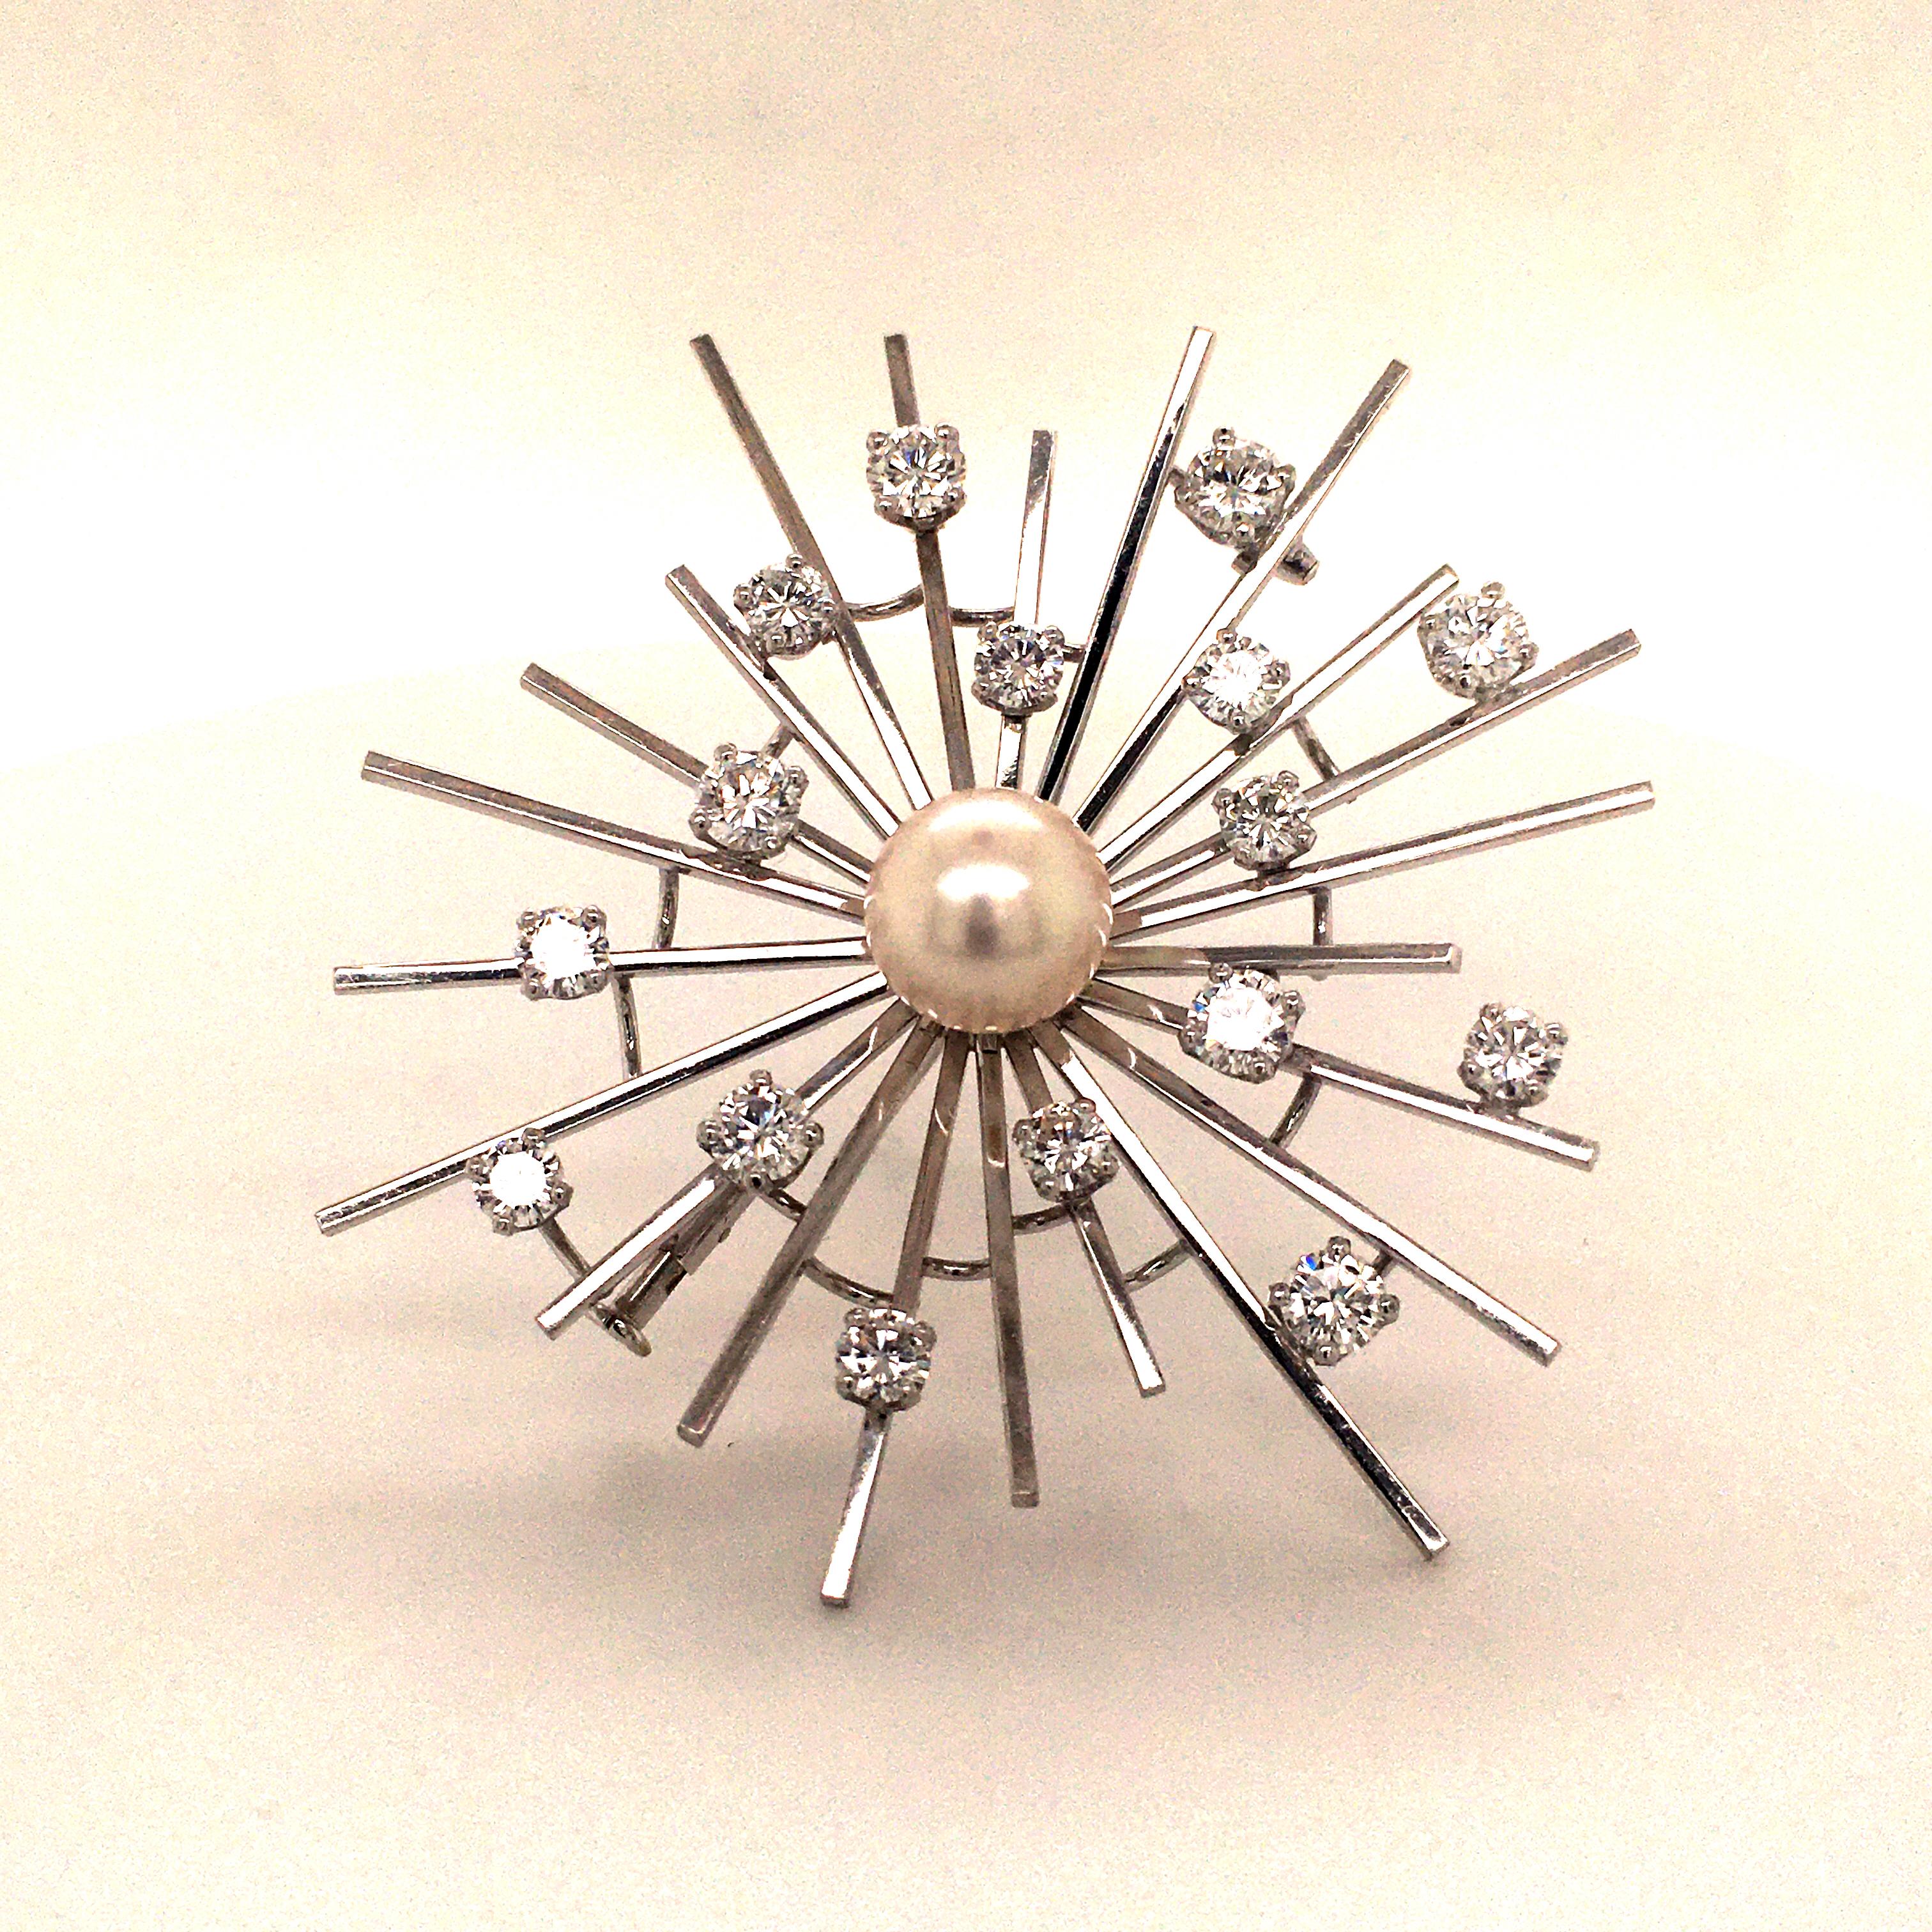 Remarkable brooch in white gold 750 with 1 white and round akoya cultured pearl with a diameter of approx. 9.5 mm. Additionally set with 16 brilliant cut diamonds totaling approx. 3.10 ct of G/H-vs quality.

Please, ask for additional information if